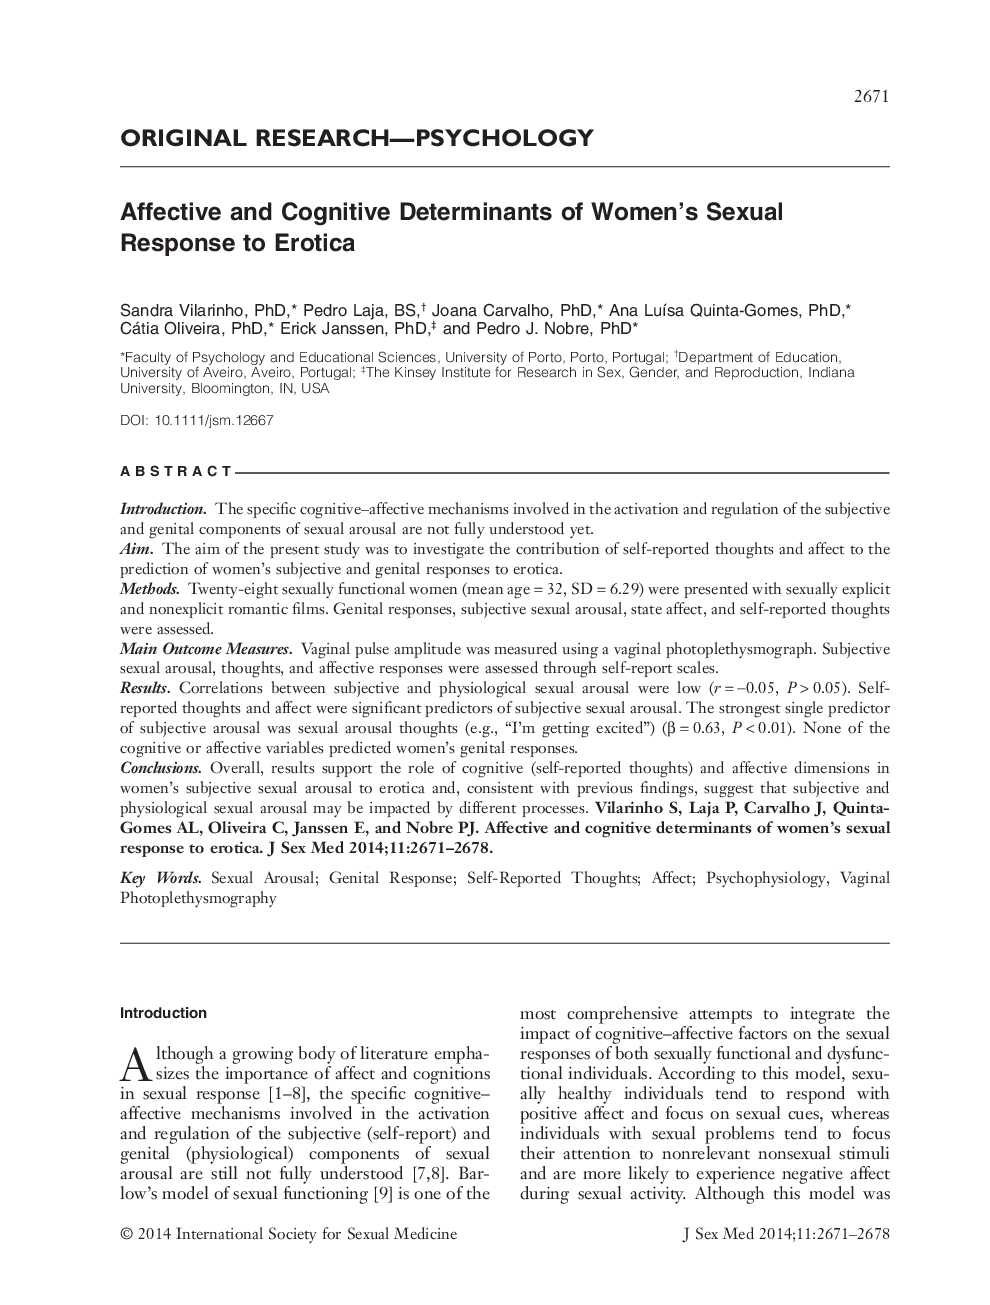 Affective and Cognitive Determinants of Women's Sexual Response to Erotica 